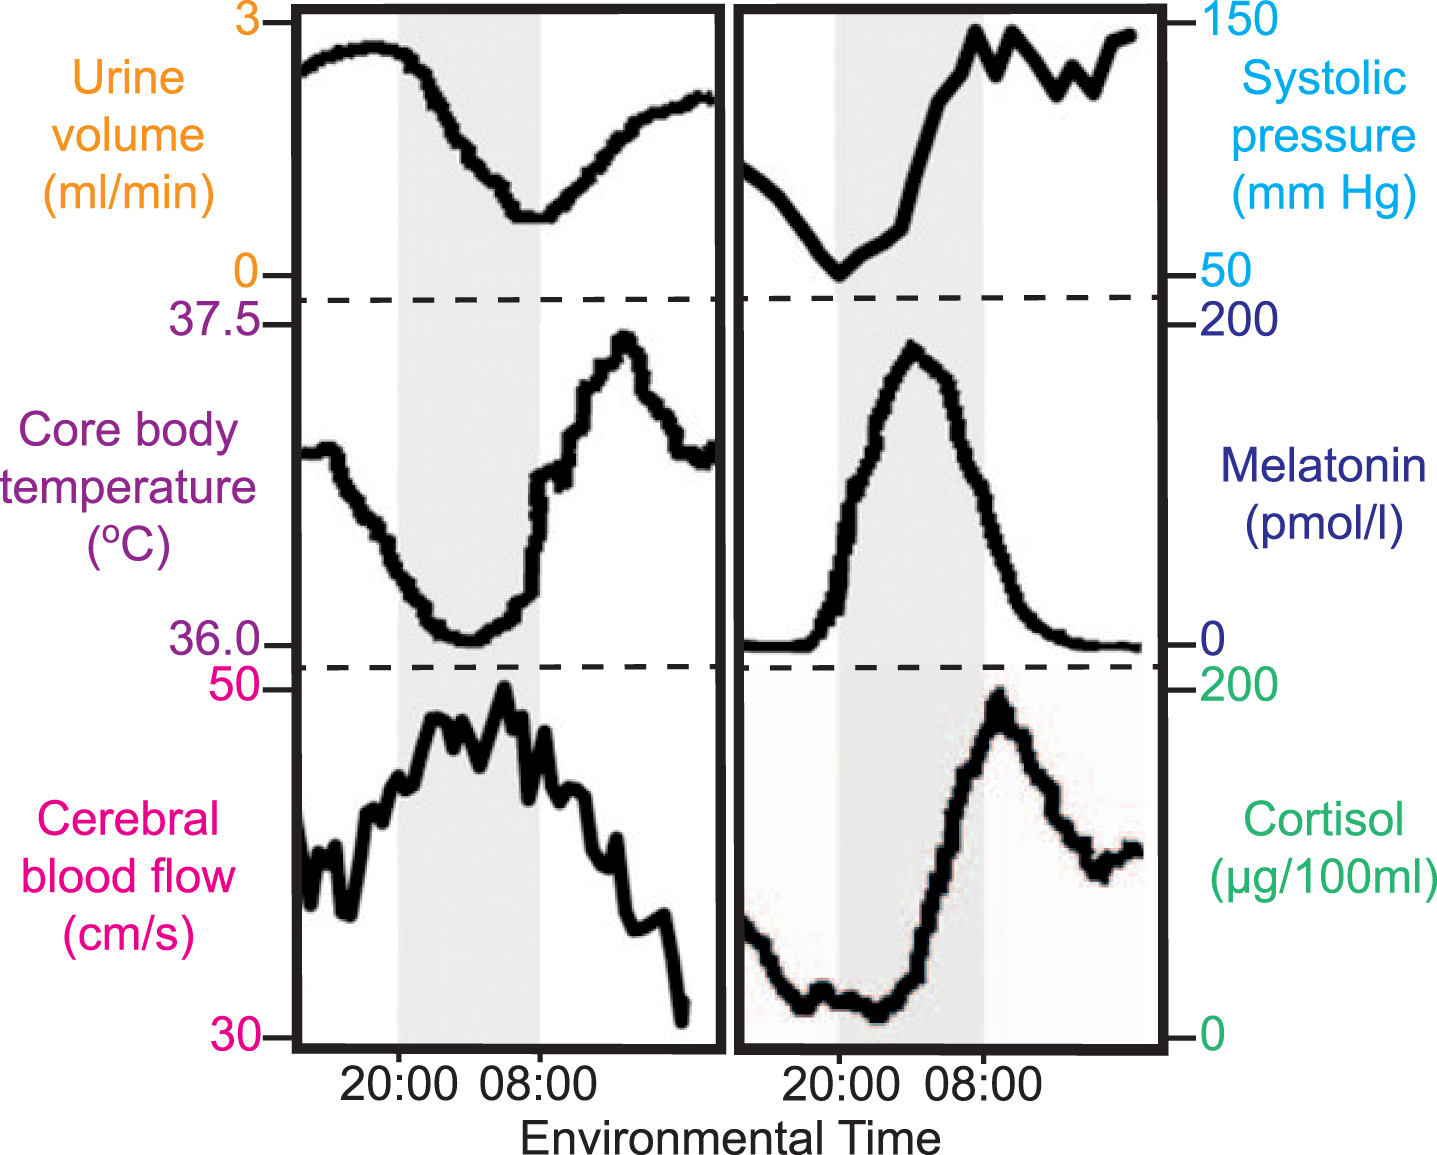 The human circadian program. Schematic representation of circadian variations of physiological and endocrine status recorded in human volunteers subject to a constant routine protocol. Grey shading represents expected sleep interval, which was denied by constant routine protocol. Based on [2].